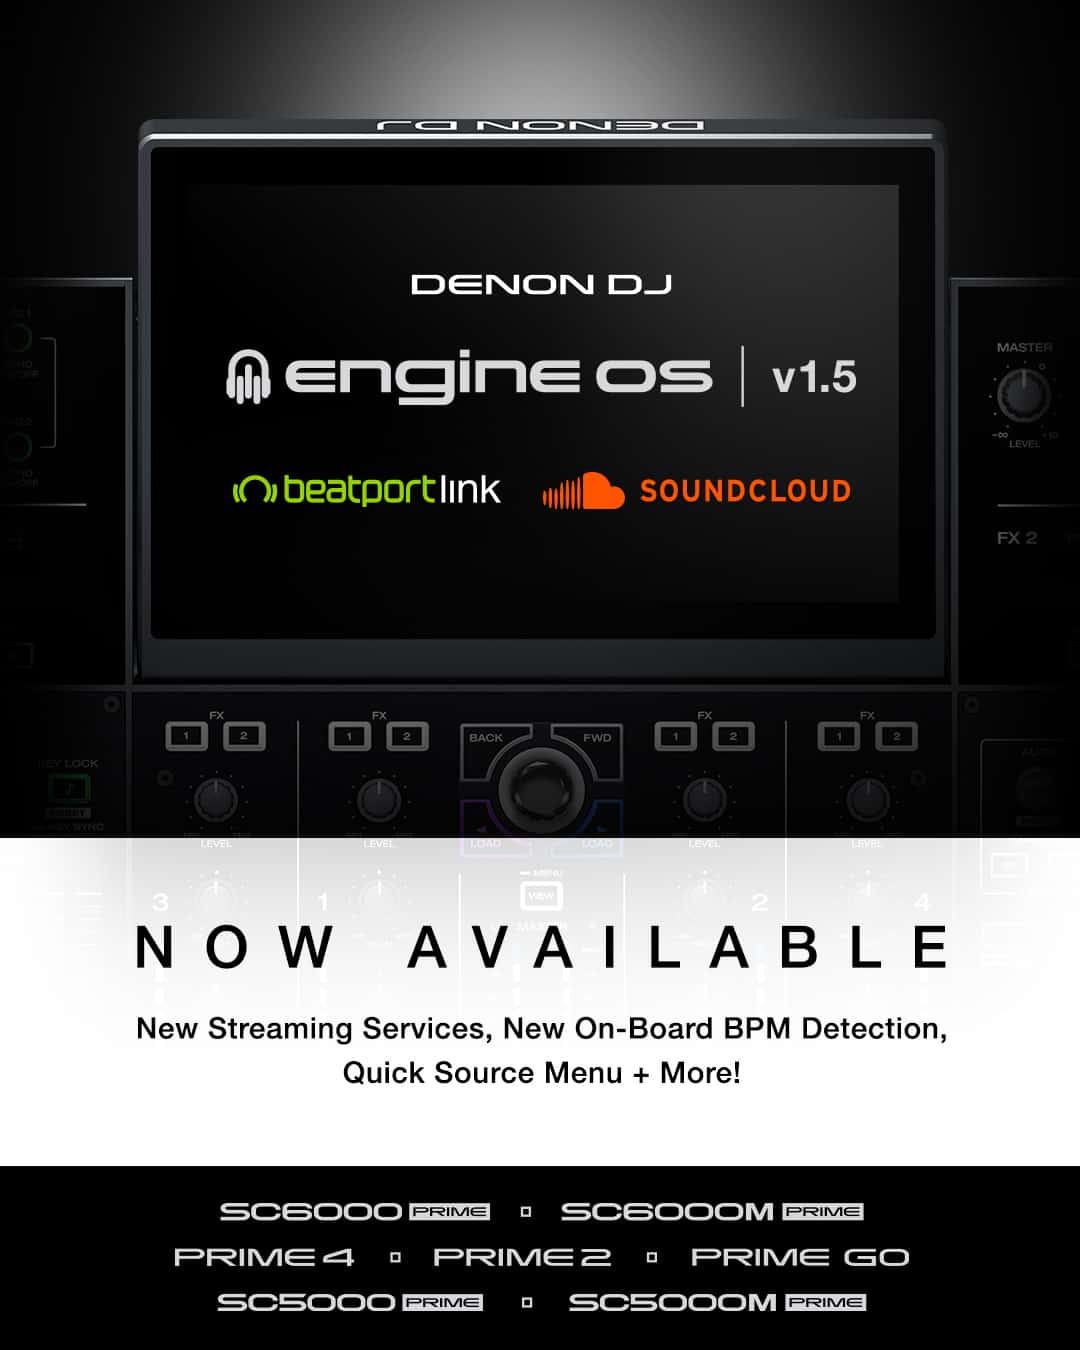 Engine® Dj Brings Soundcloud & Beatport Link To All Denon DJ Engine OS Devices